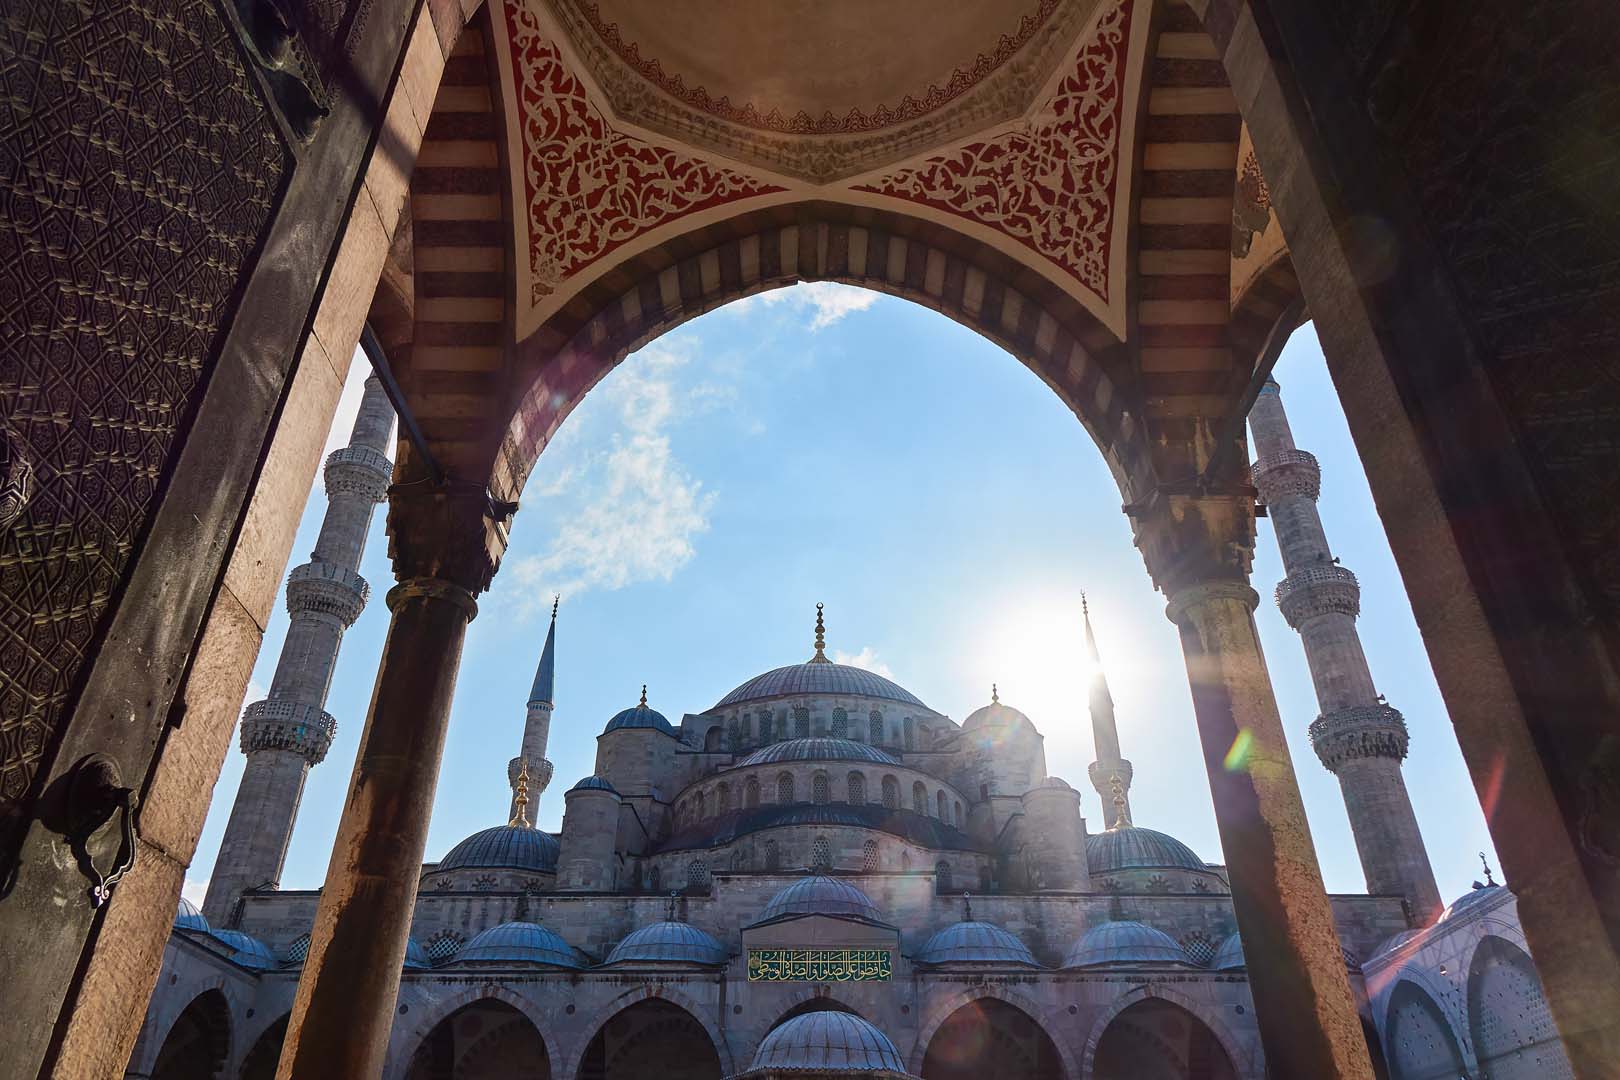 Blue mosque Turkey has the highest number of mosques worldwide